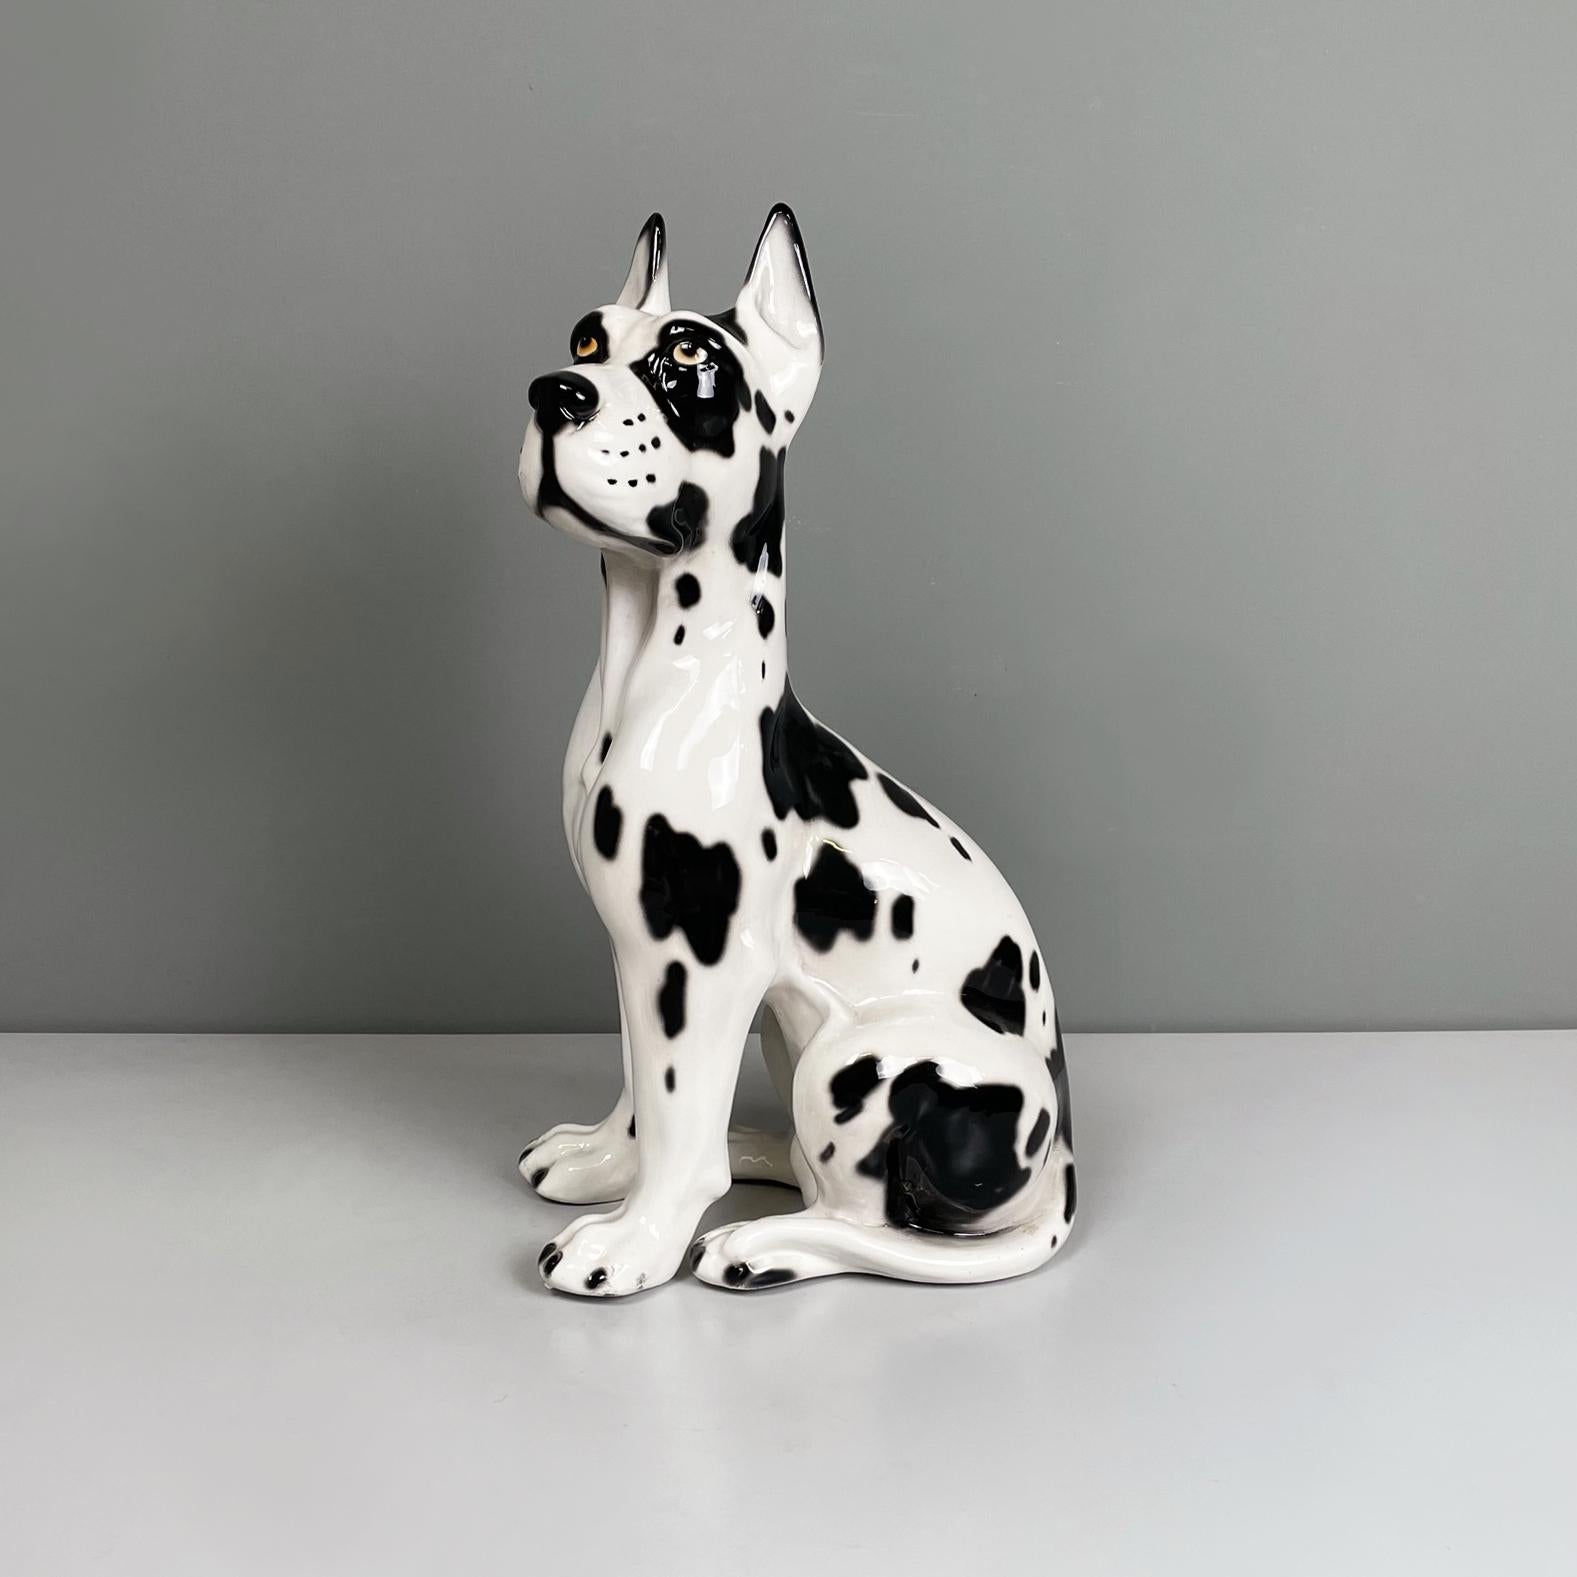 Italian modern Black and white ceramic sculpture of Harlequin Great Dane dog, 1980s
Ceramic sculpture depicting a Harlequin Great Dane sitting on its hind legs. The dog has the characteristic muscular build with black and white spots.
1980s.
Good